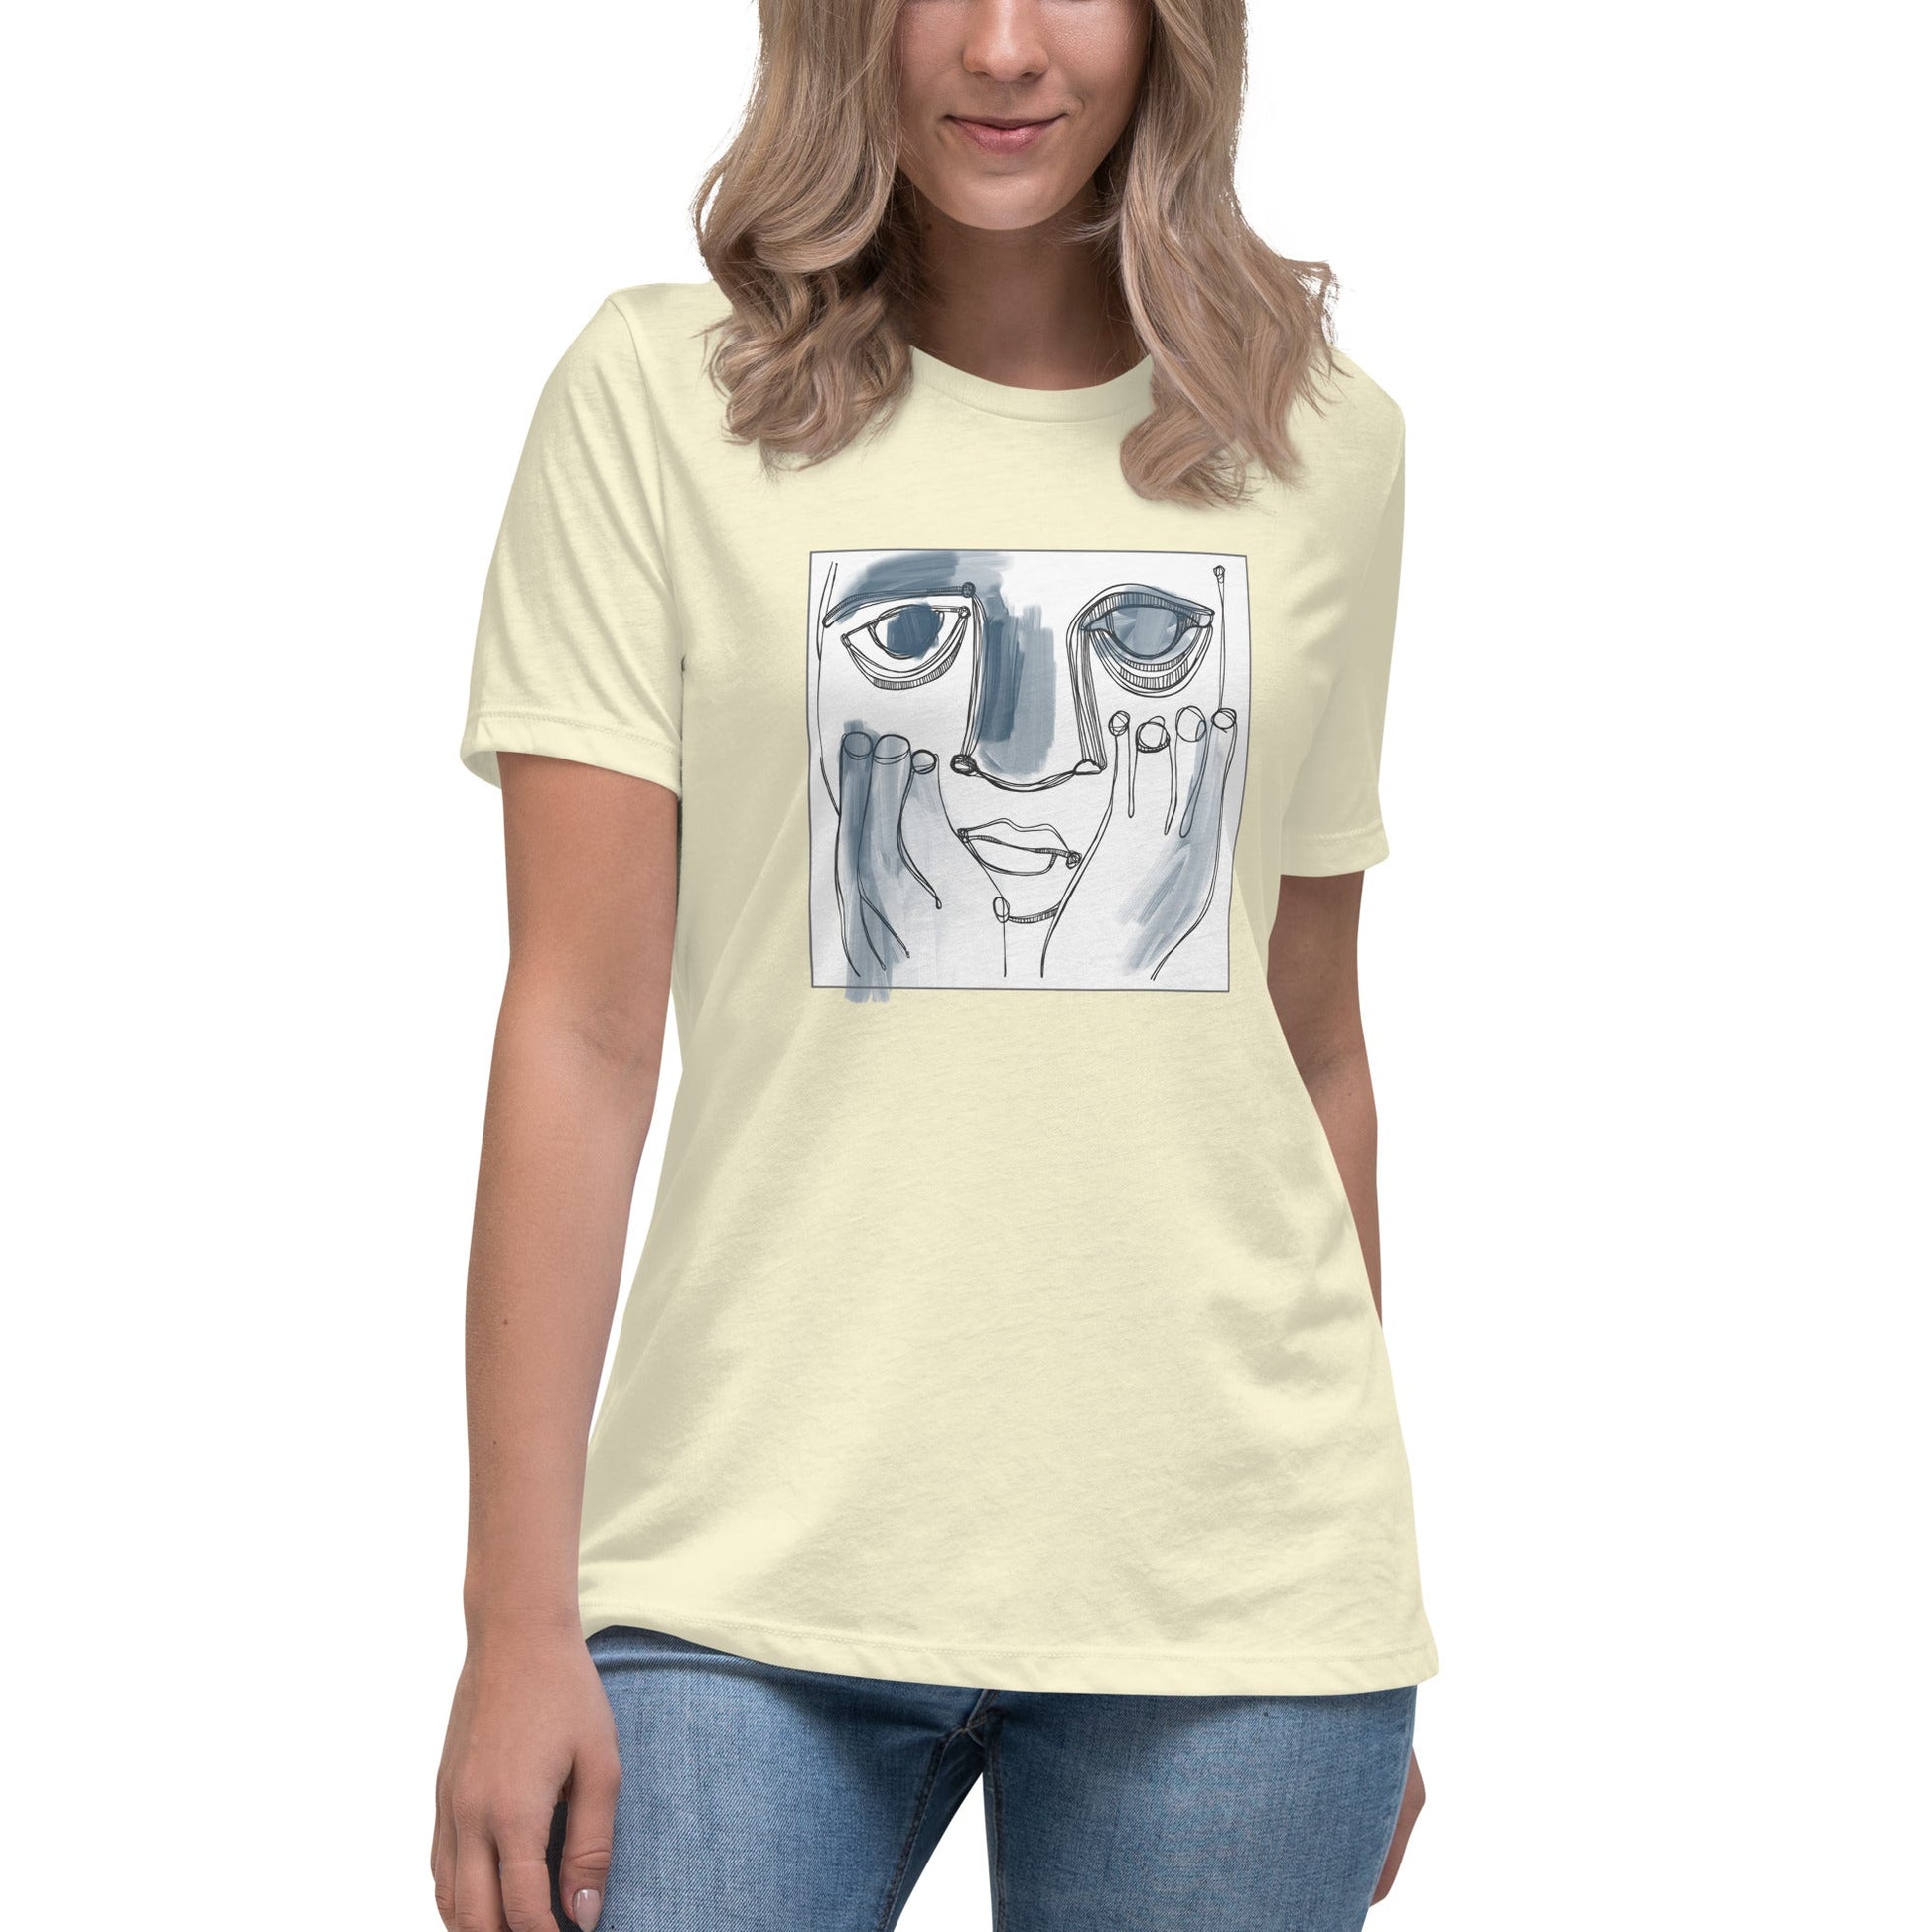 FACES LOOK 4 Women's Relaxed T-Shirt - Bonoteewomens-relaxed-tshirt-faces-look-4-citron